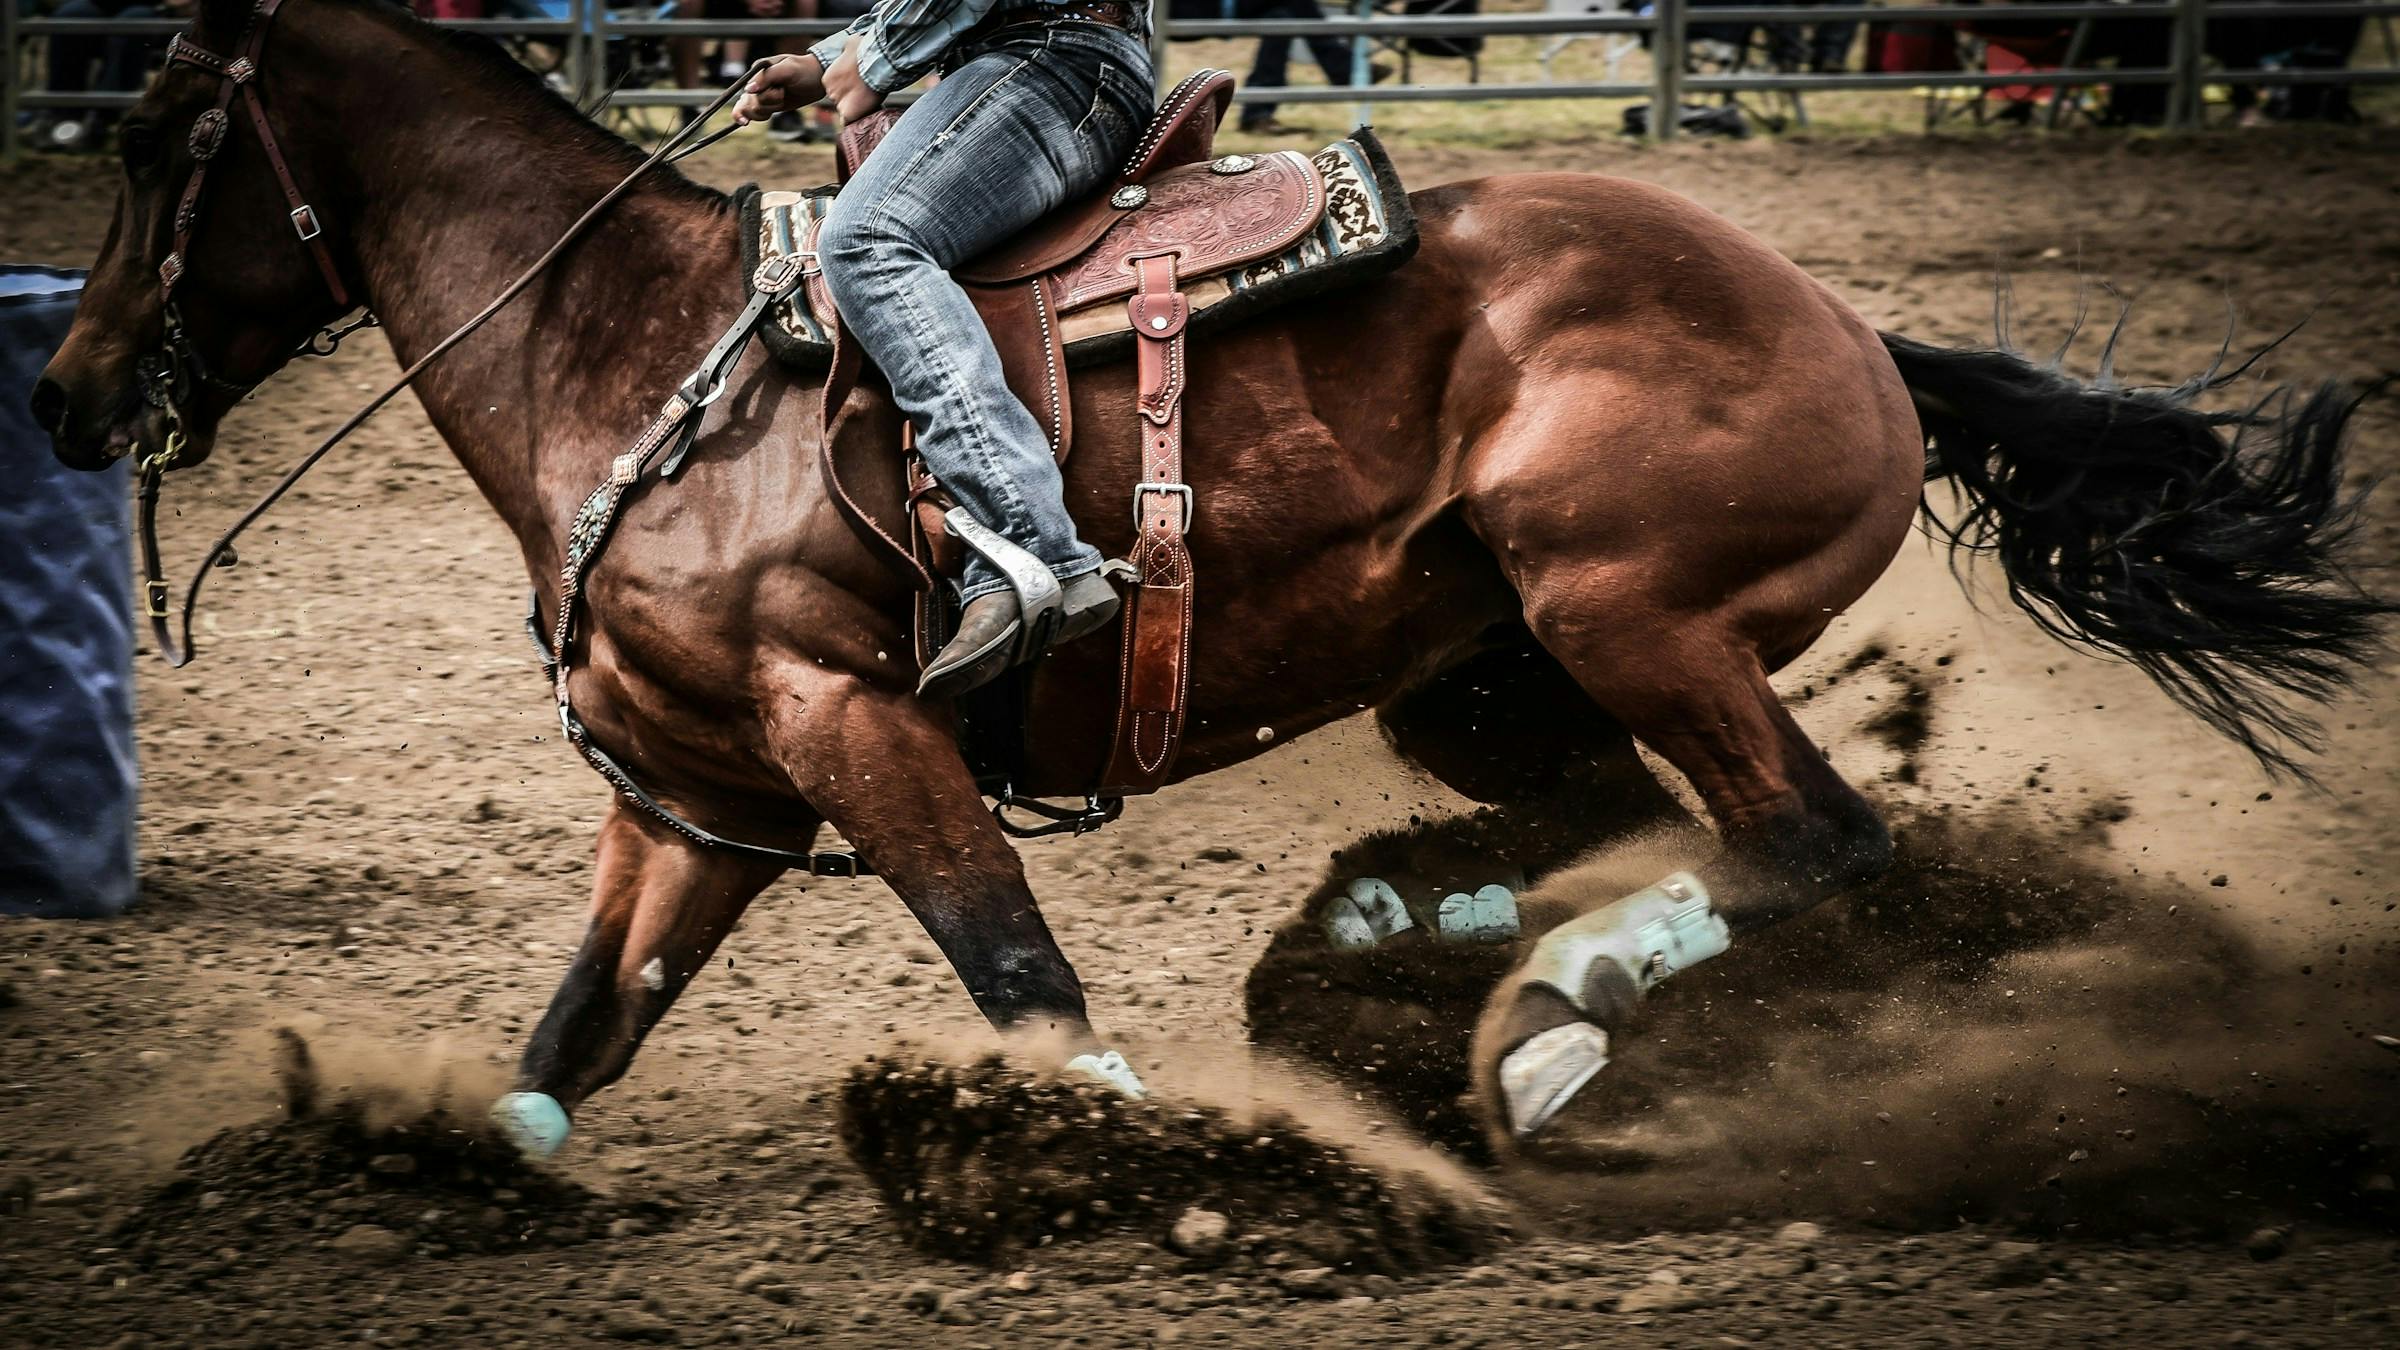 Thumbnail for World's Oldest Rodeo - Payson